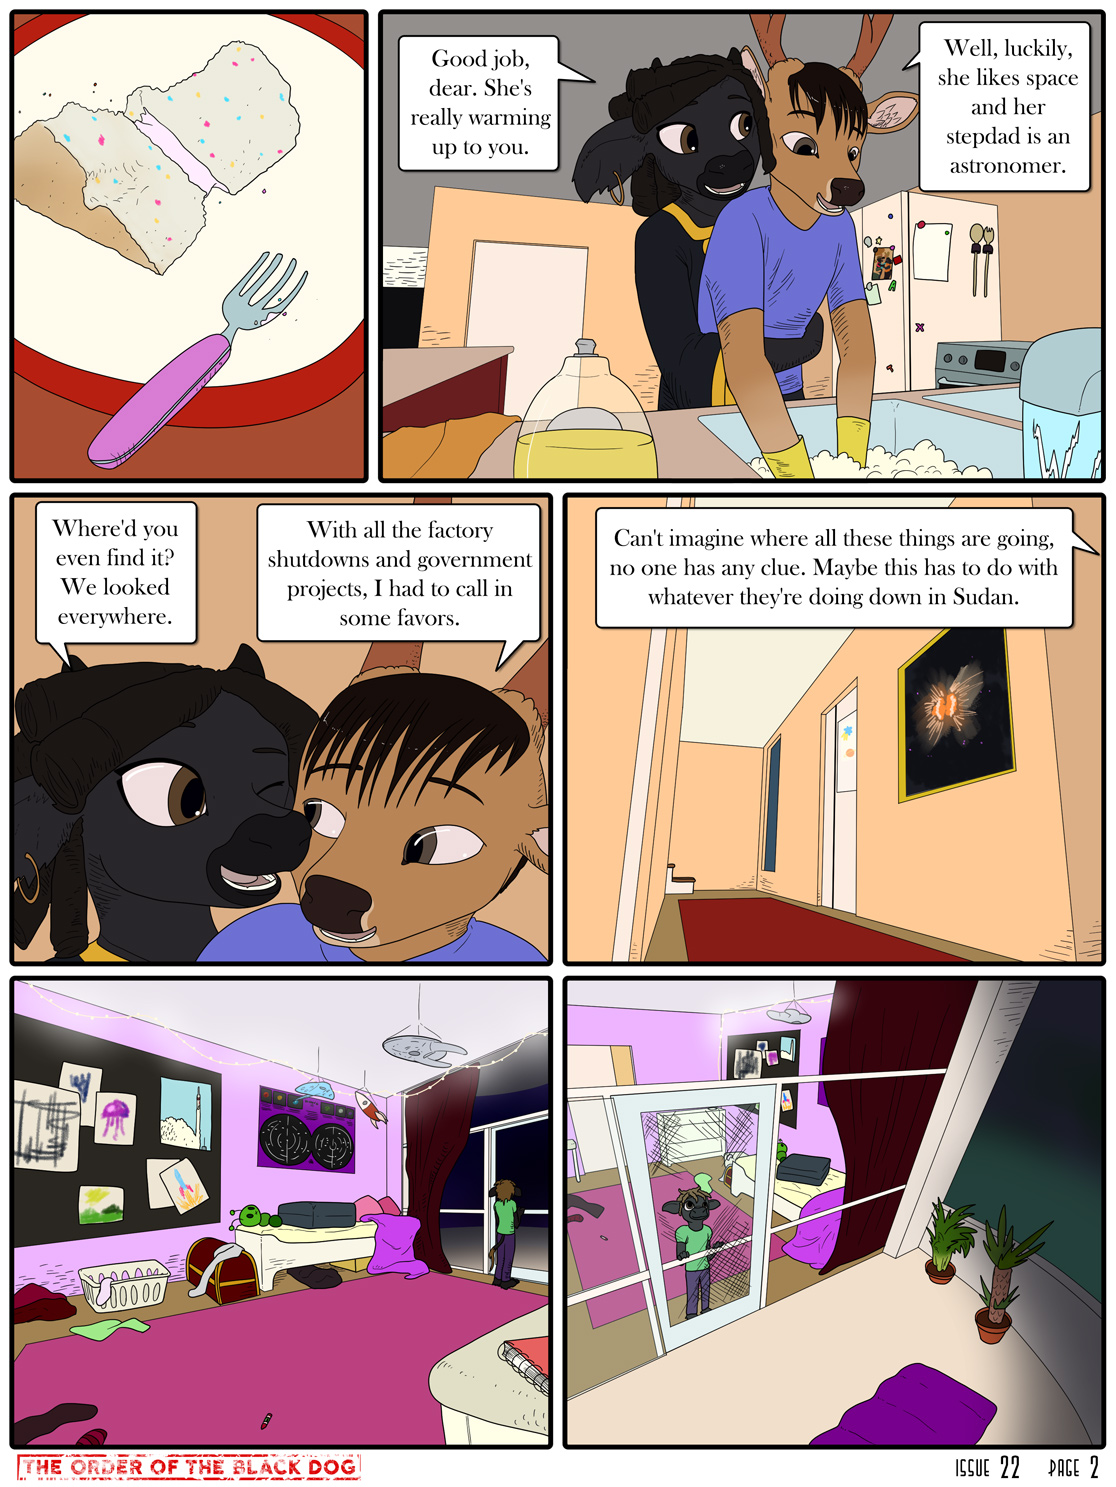 Issue 22, Page 2